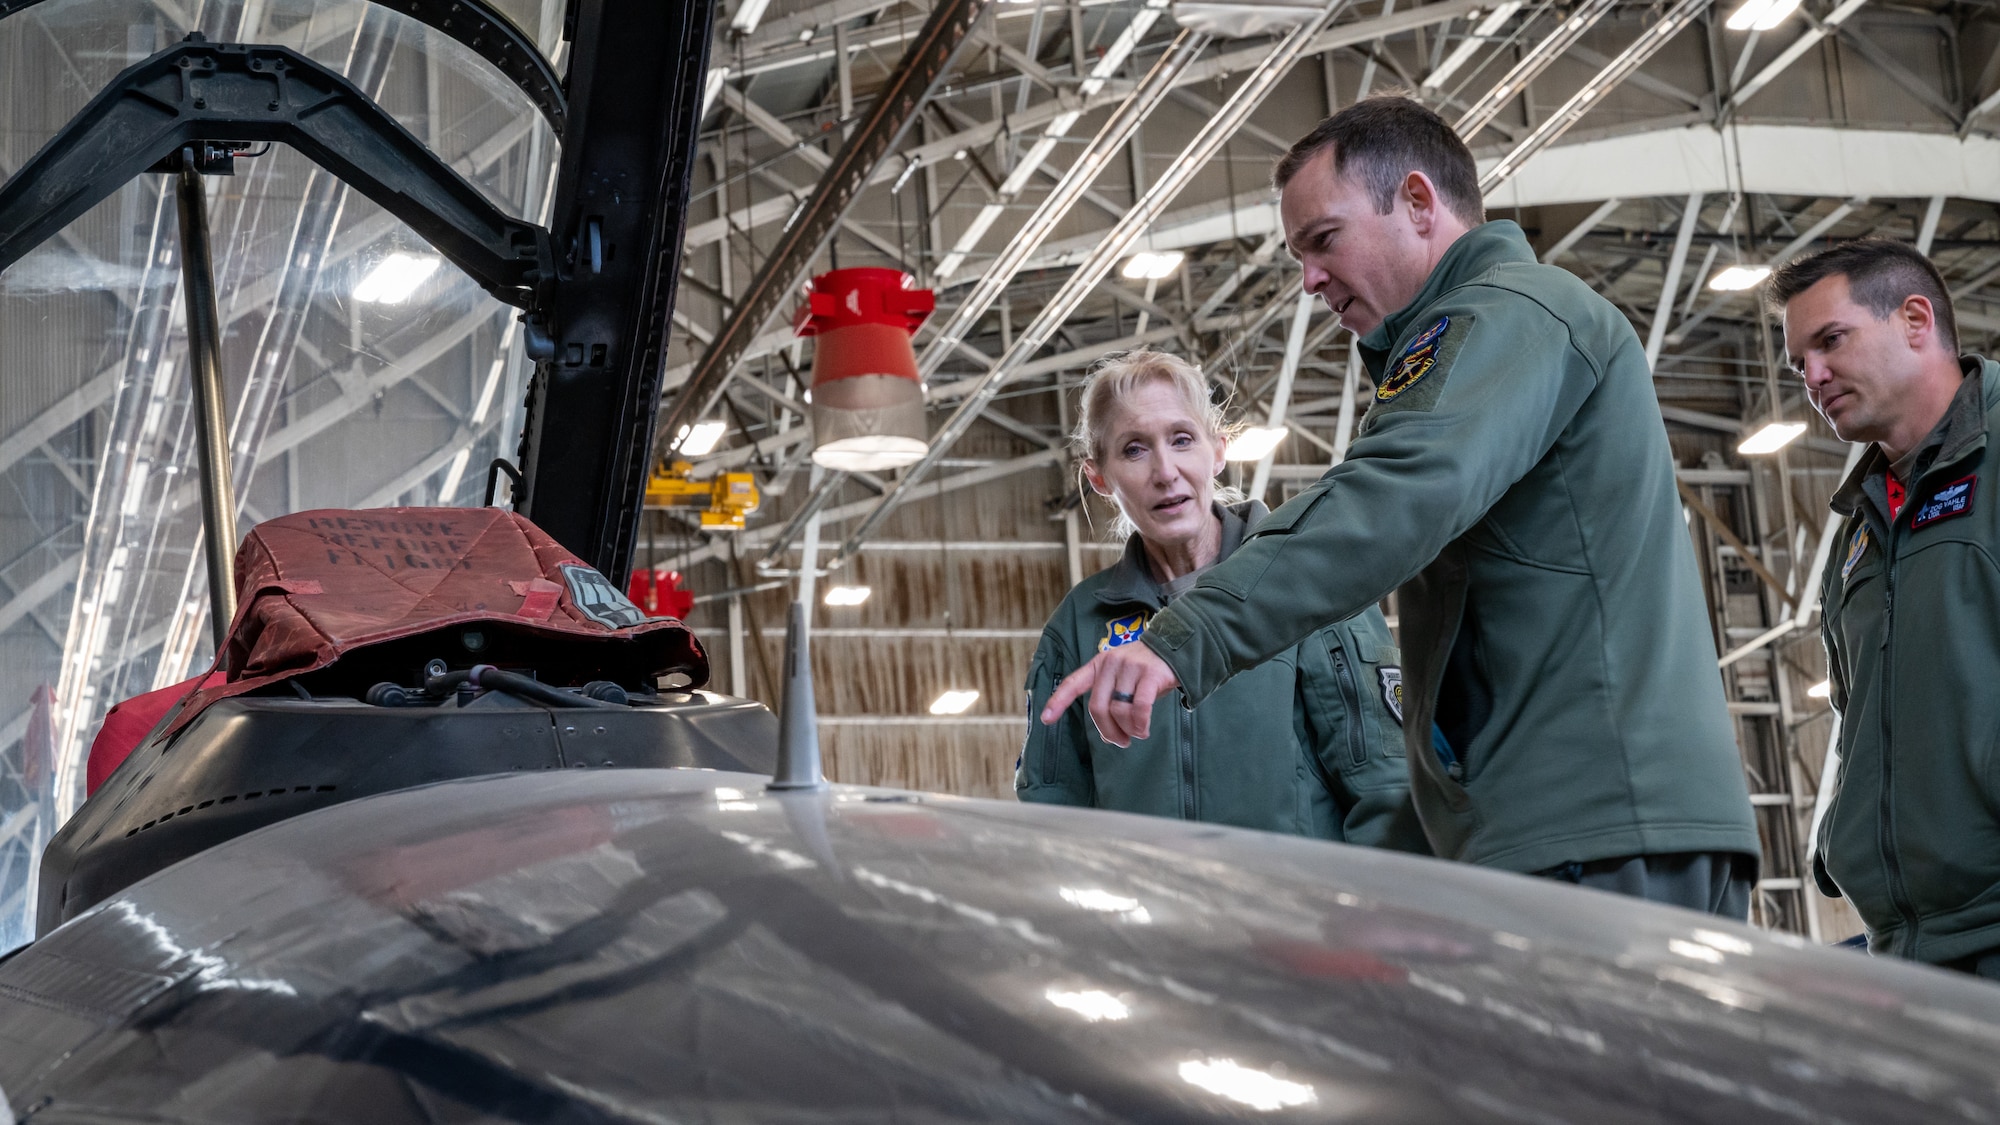 Maj. Jacob Schonig, 416th Flight Test Squadron, F-16 Test Pilot, briefs Maj. Gen. Jeannie Leavitt, Department of the Air Force Chief of Safety, on the X-62A Variable In-flight Simulator Aircraft